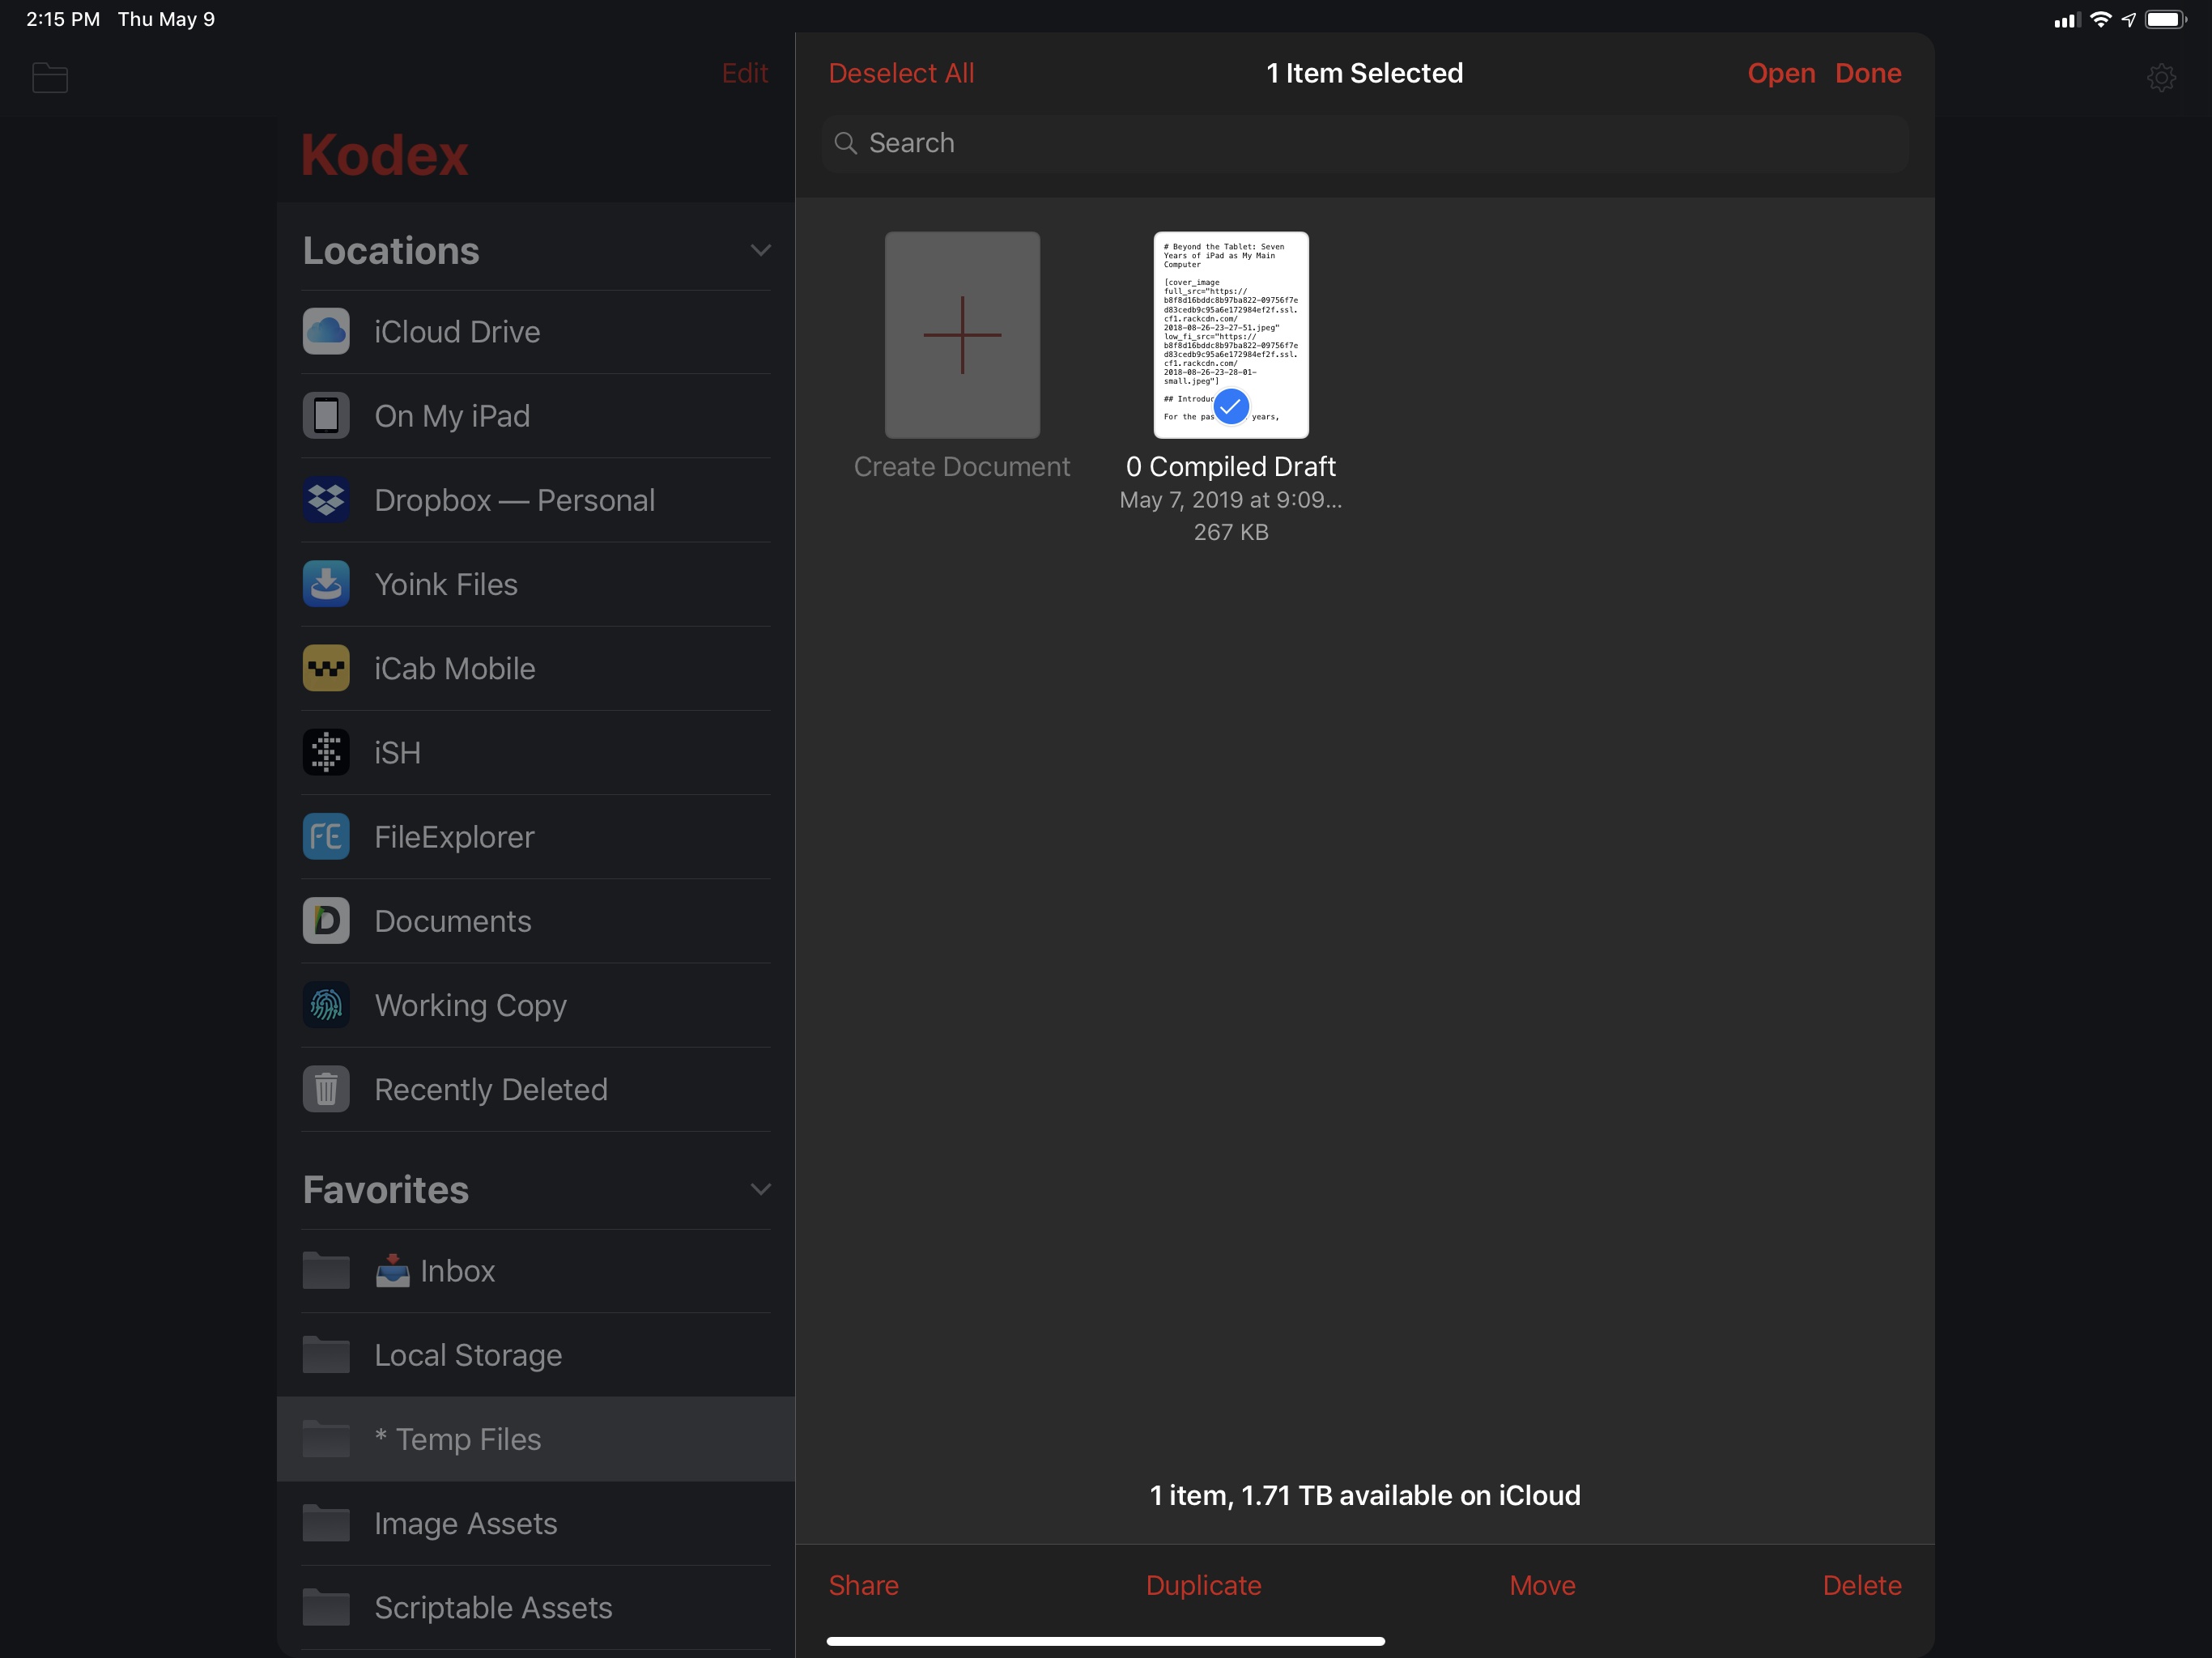 Kodex can open any text document using a Files picker.